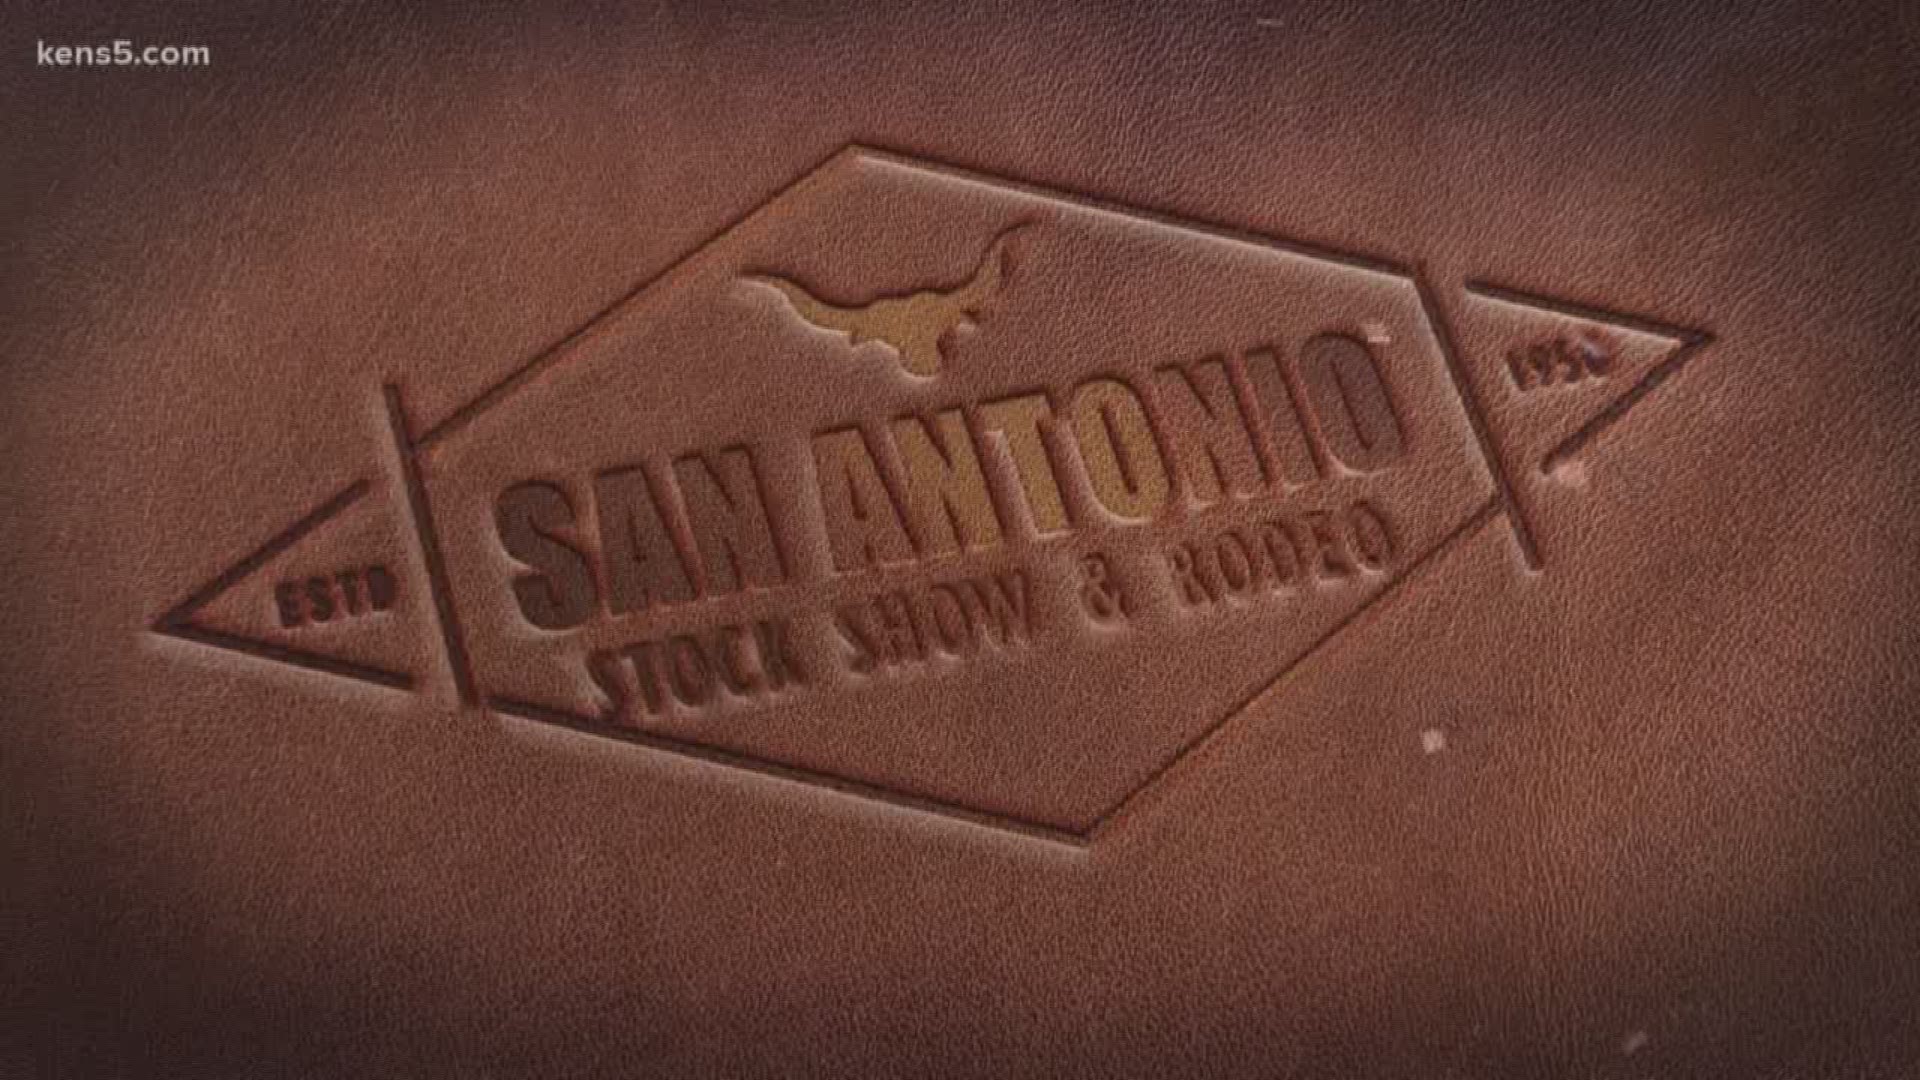 Grab your cowboy boots! It's time for the San Antonio Stock Show & Rodeo.